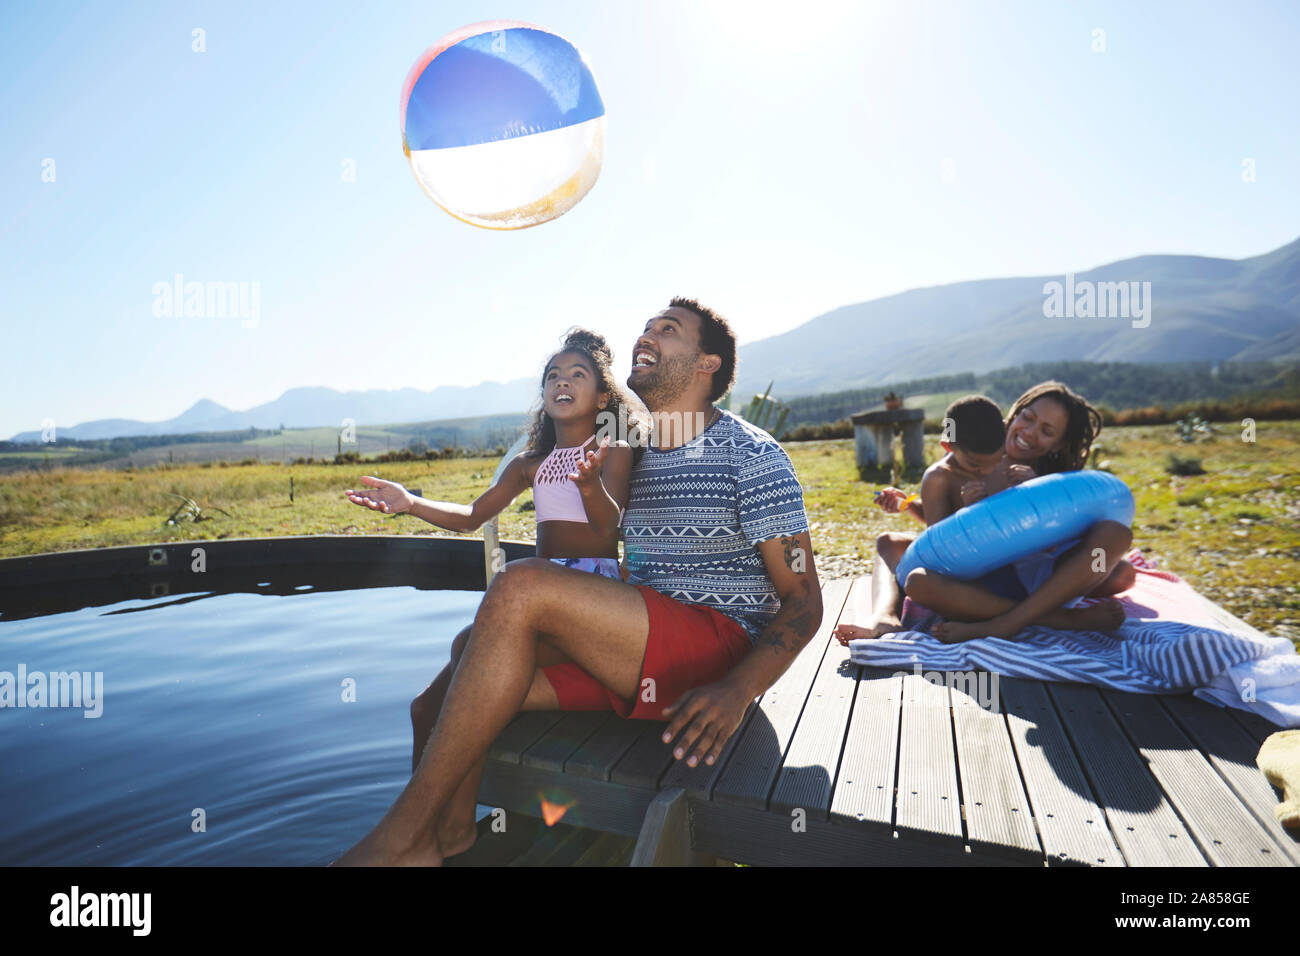 Playful family with beach ball at sunny, summer swimming pool Stock Photo